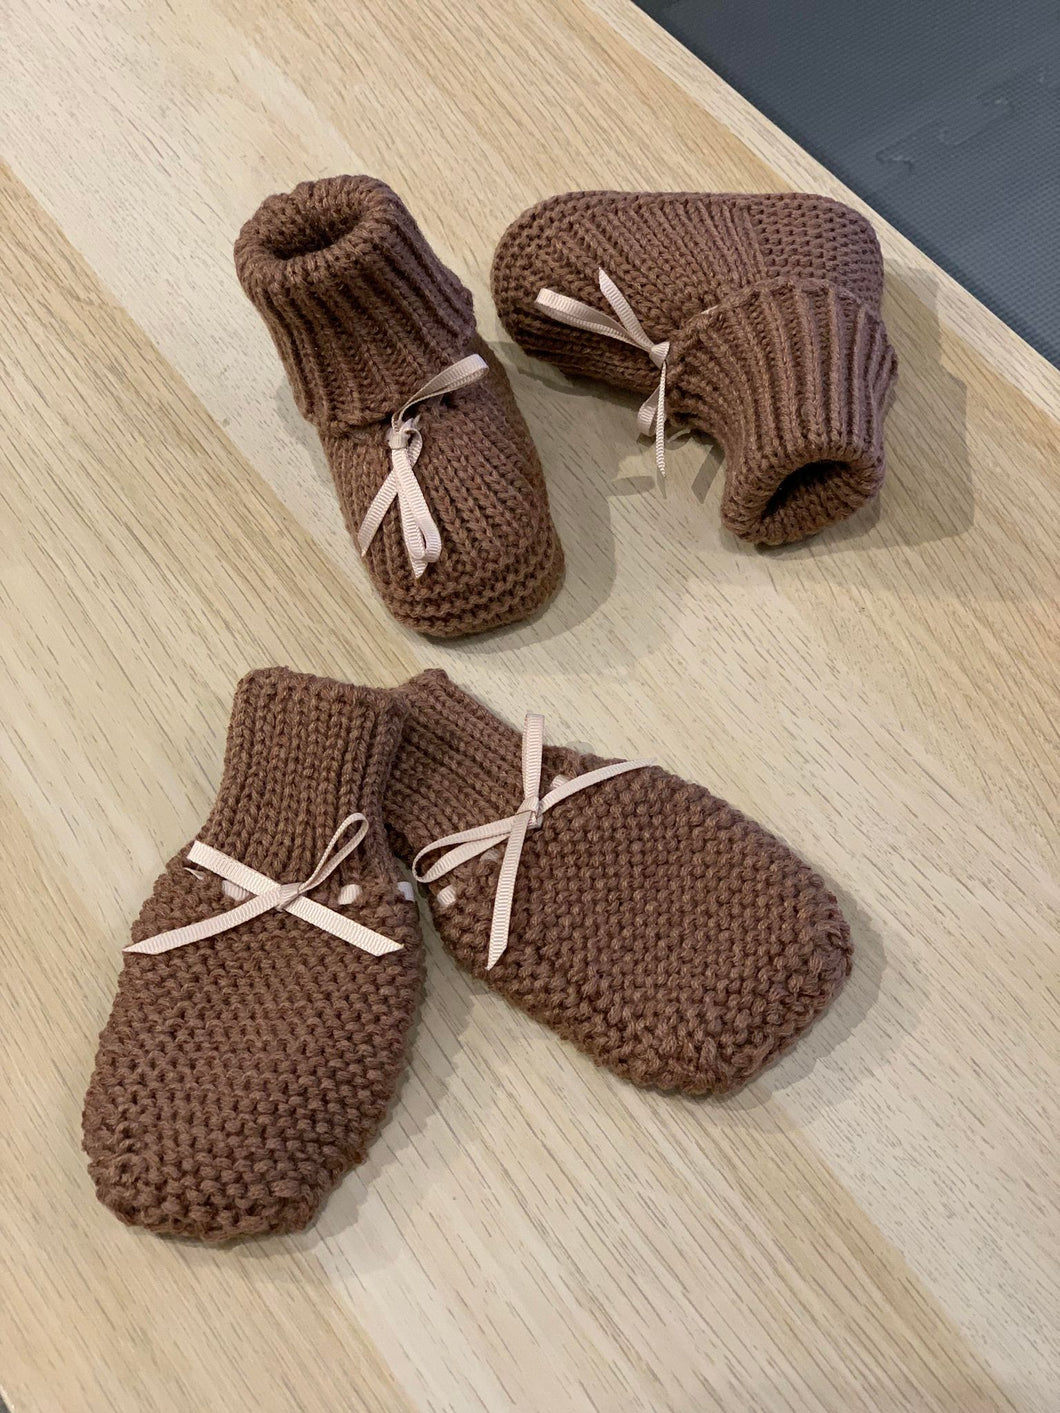 Knitted Baby Boots & Mittens - Coffee